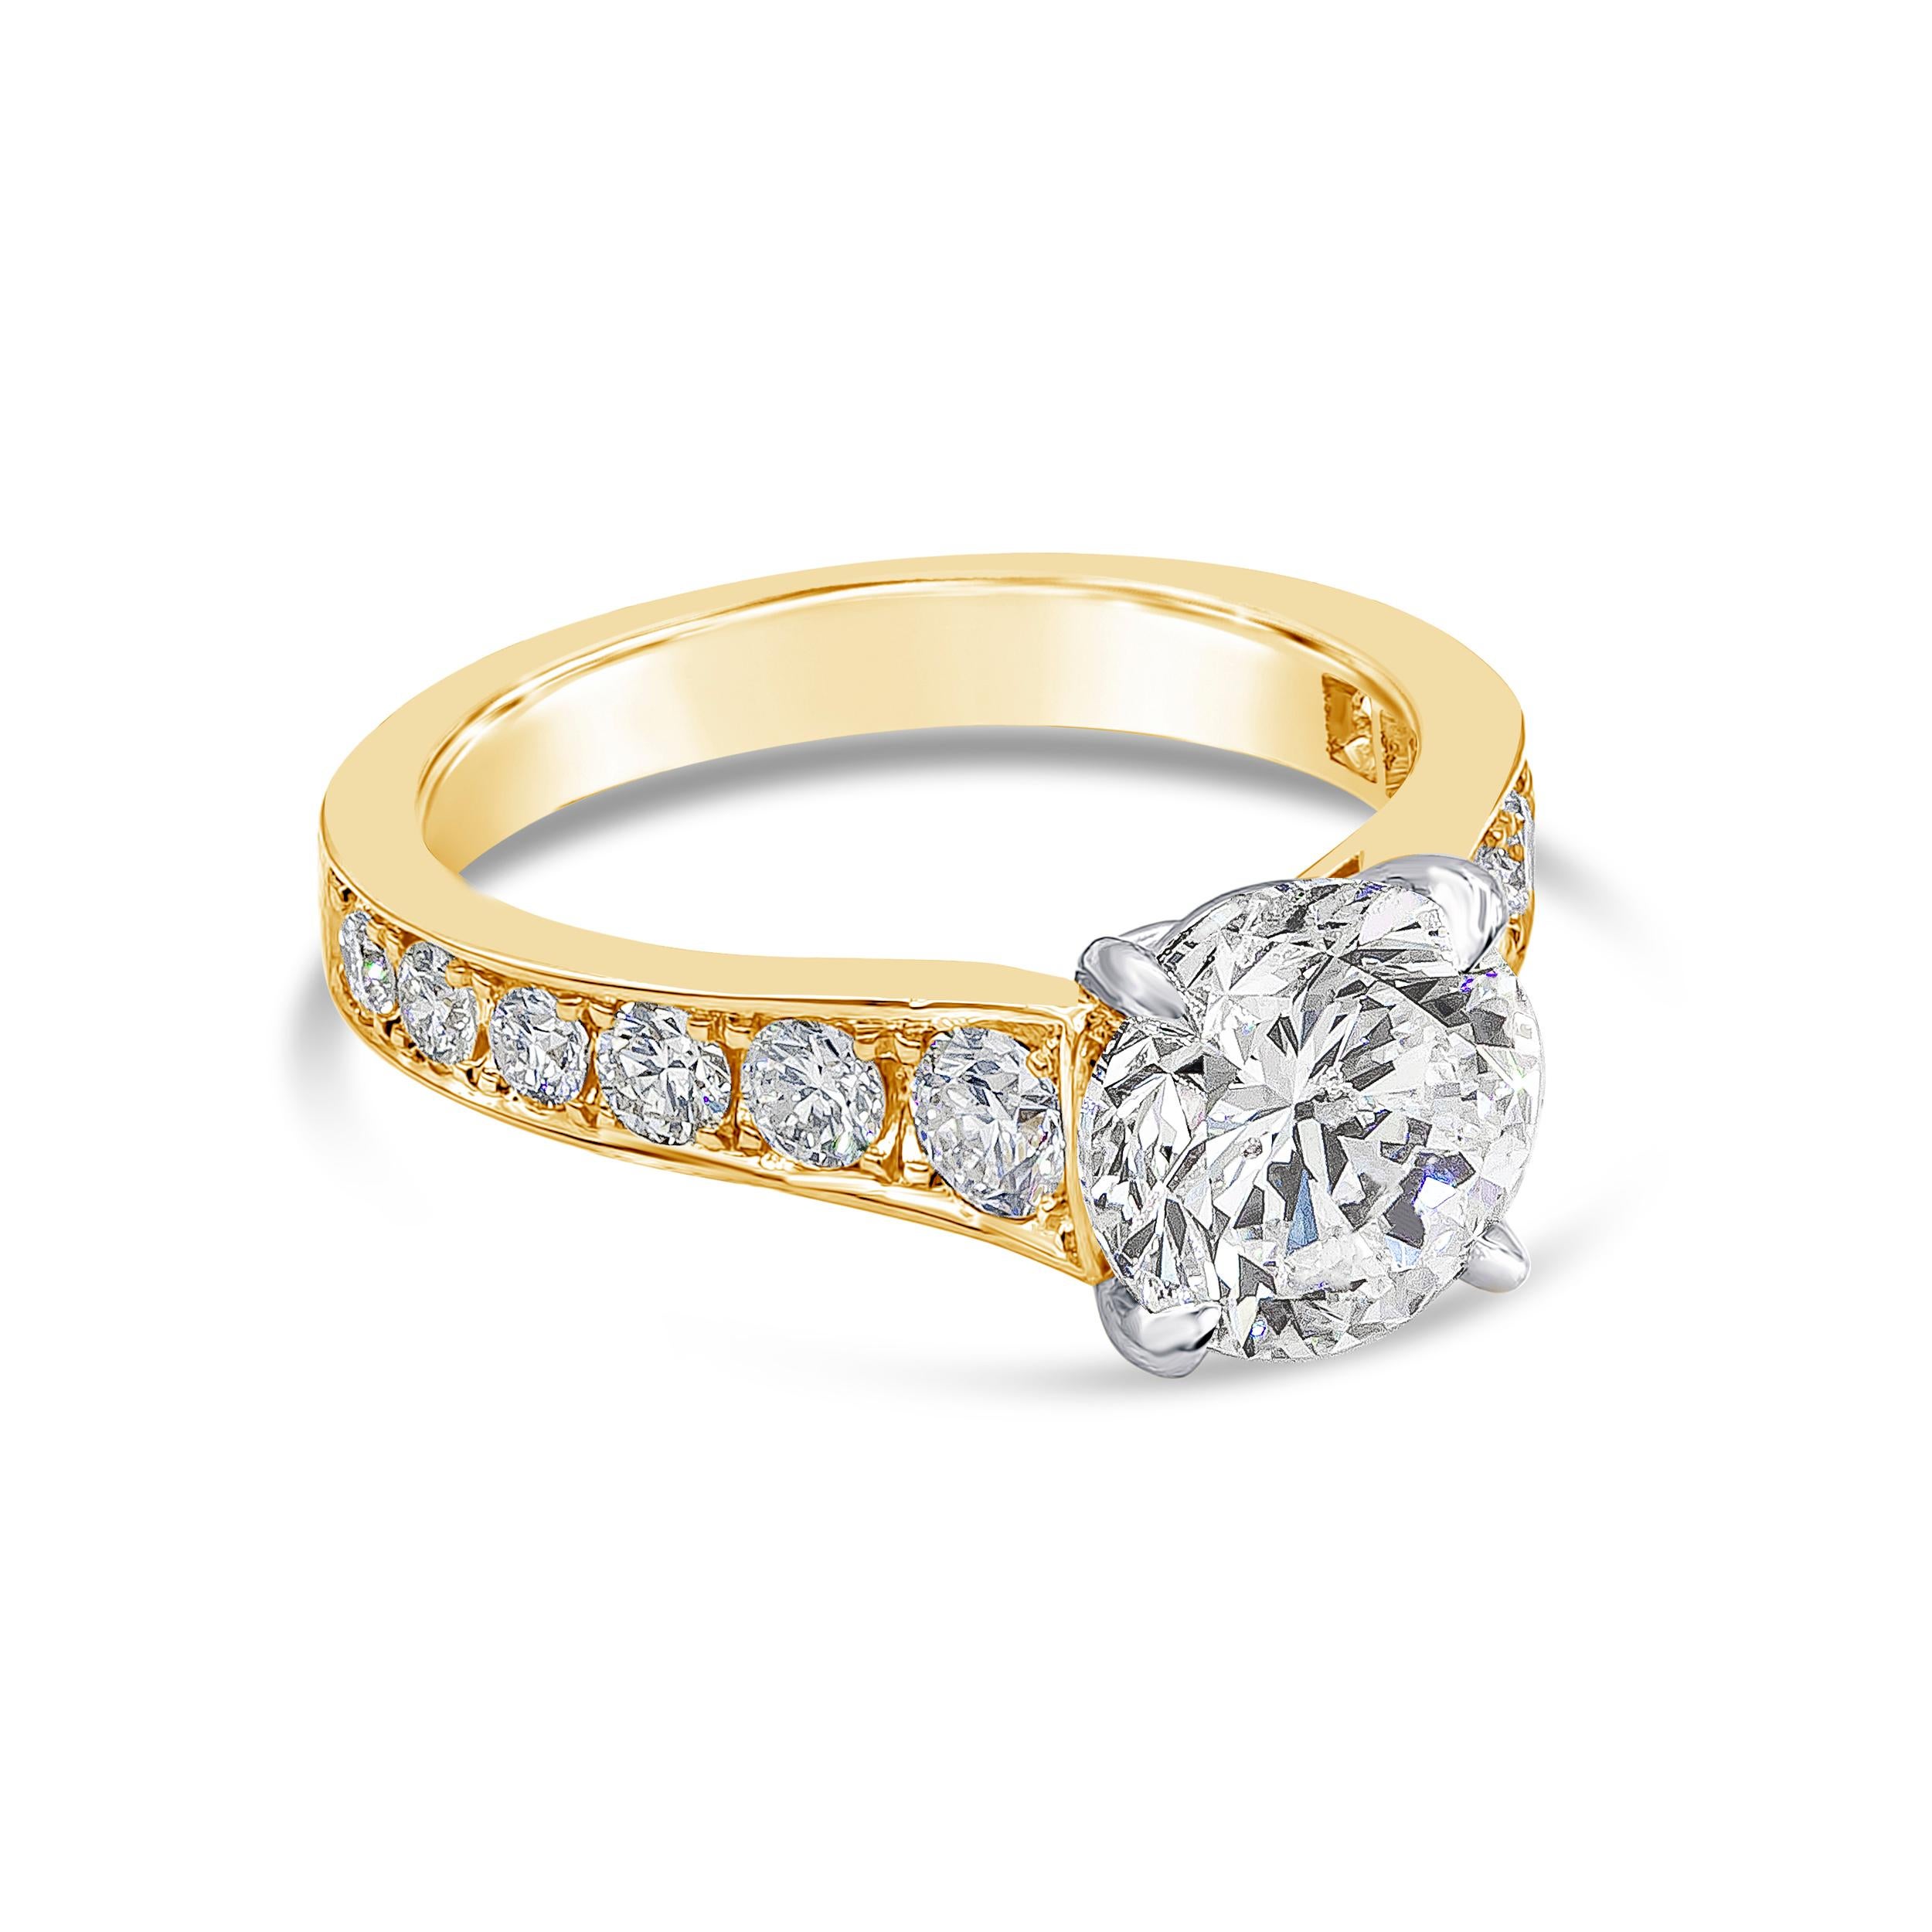 A timeless engagement ring style showcasing a 1.97 carats round brilliant diamond, set in a tapered yellow gold mounting accented with round diamonds. Accent diamonds weigh 0.75 carats total. GIA certified the center diamond as G color, I1 clarity.